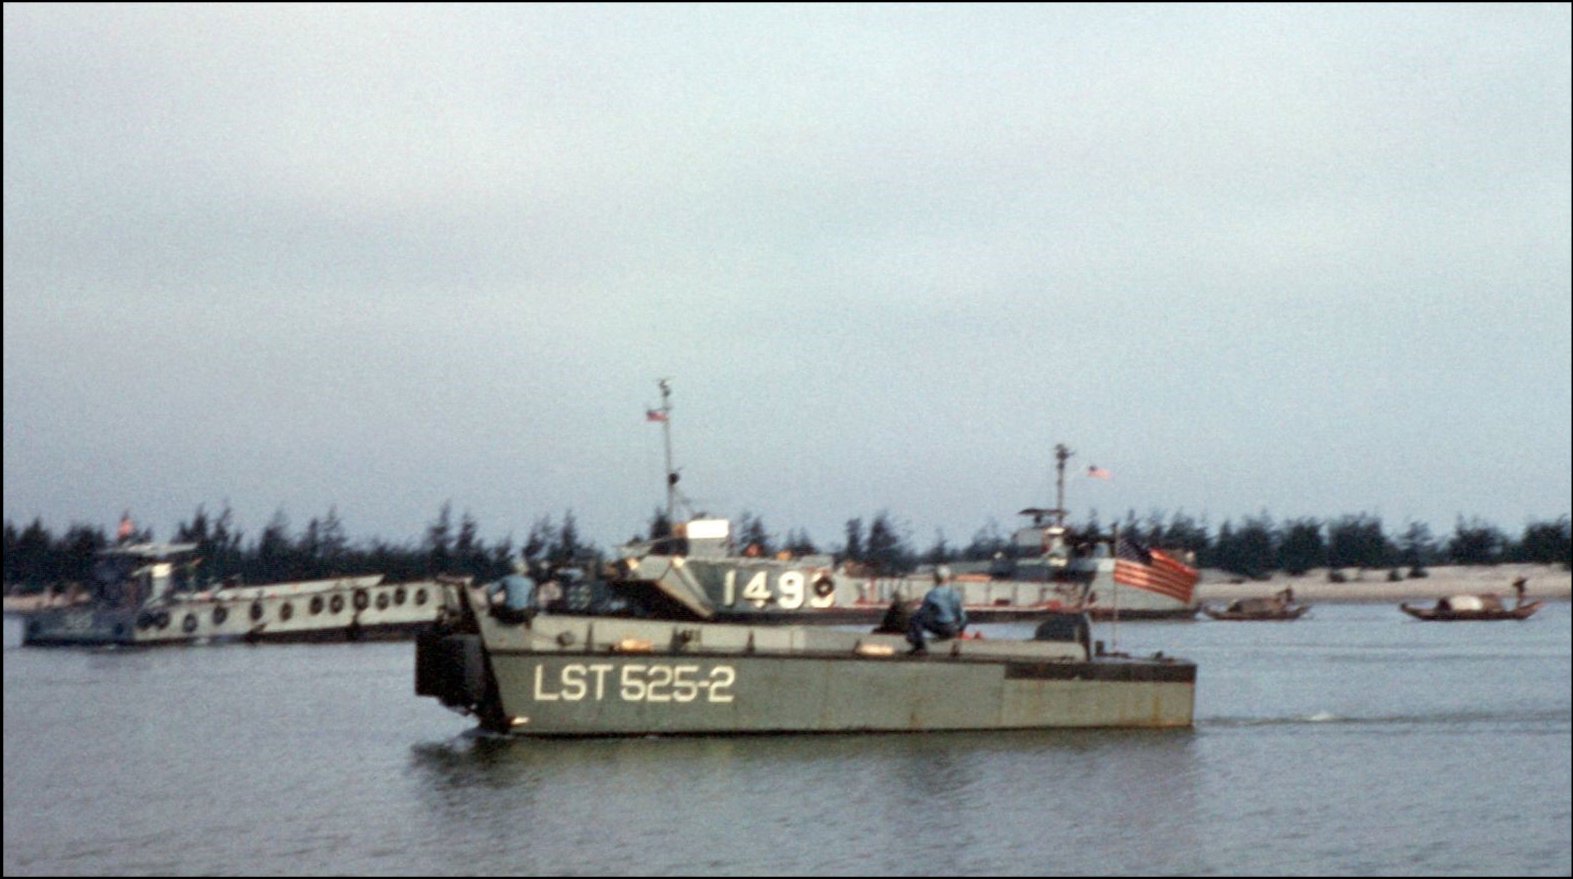 A Navy LCVP on the Cua Viet River, March 15, 1967